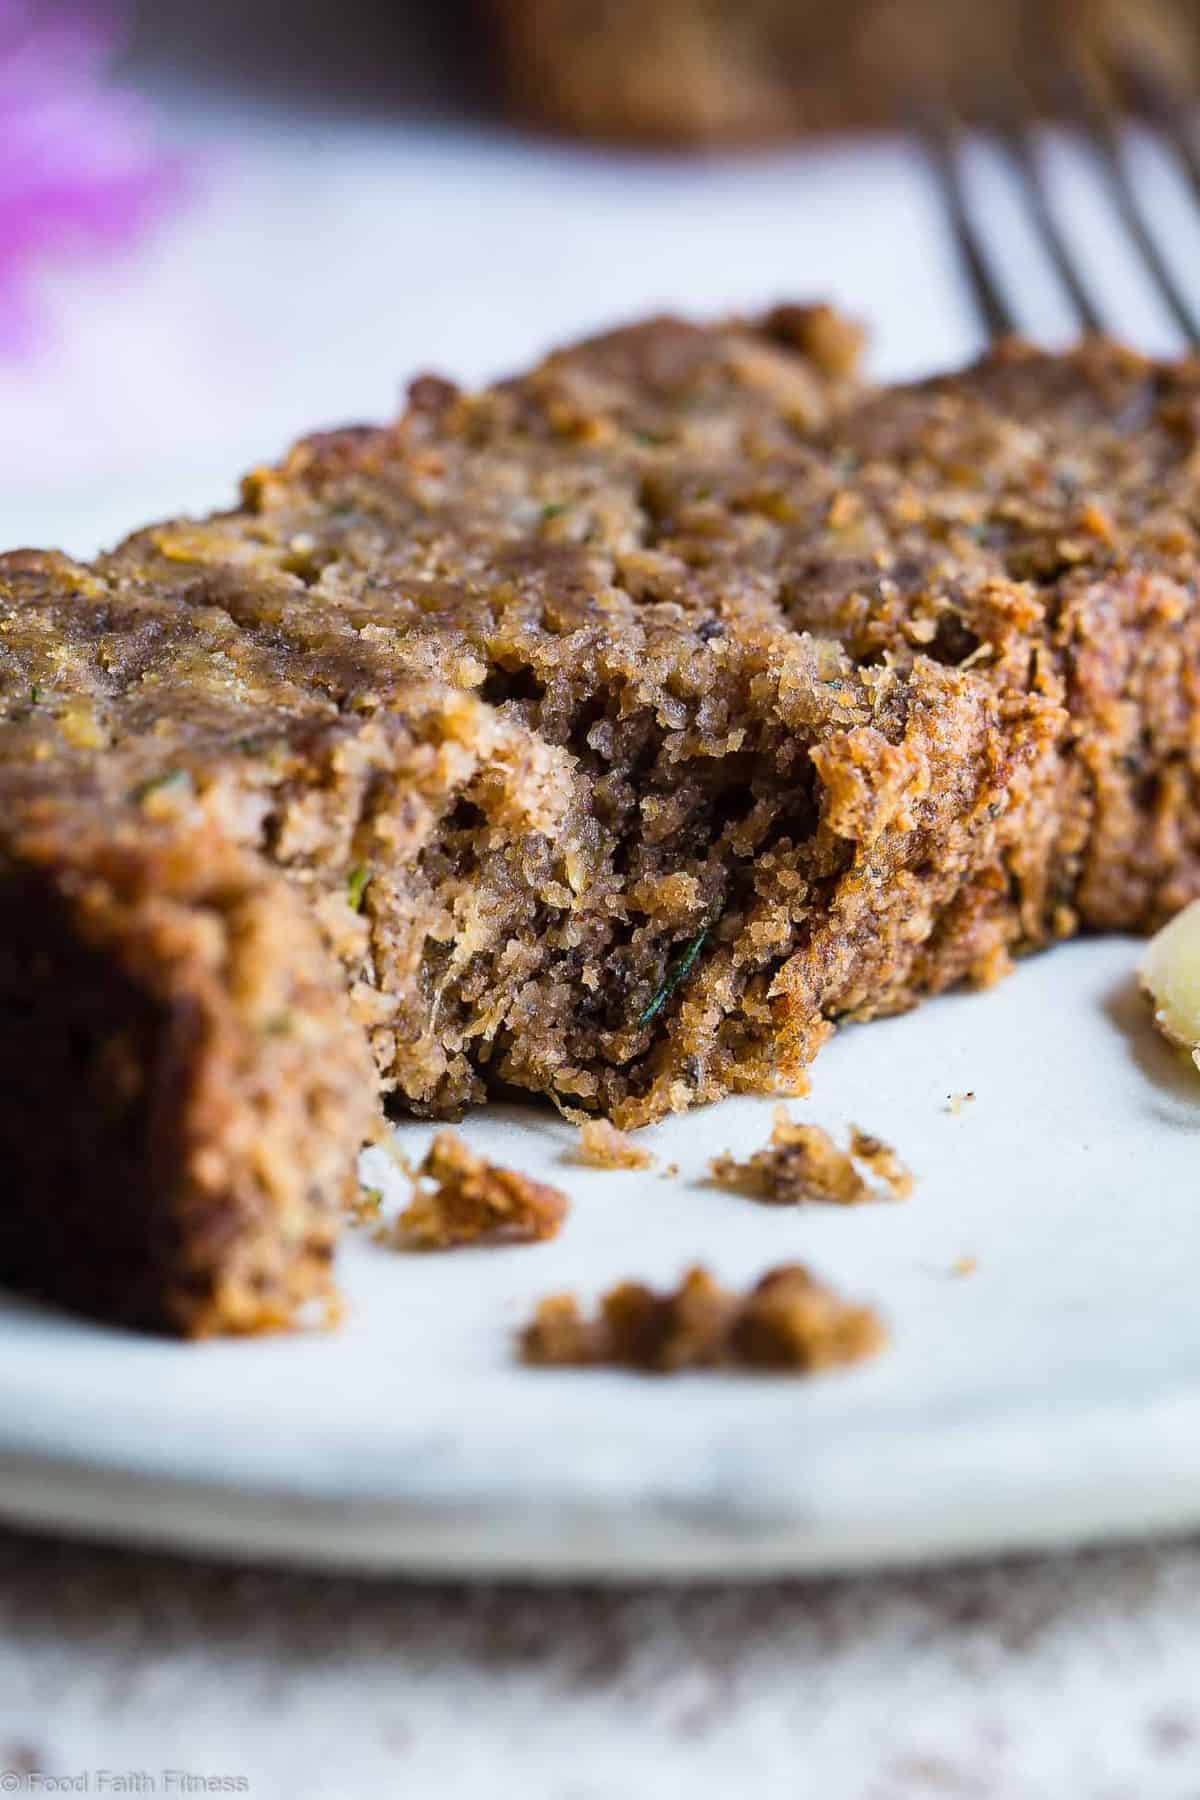 Five Spice Eggless Vegan Zucchini Bread - This healthy, gluten free zucchini bread has ADDICTING spicy-sweet flavor and is SO moist and tender! You'll never know it's dairy and grain free and paleo friendly! Freezer friendly too! | #Foodfaithfitness | #Glutenfree #Vegan #Paleo #Dairyfree #Healthy